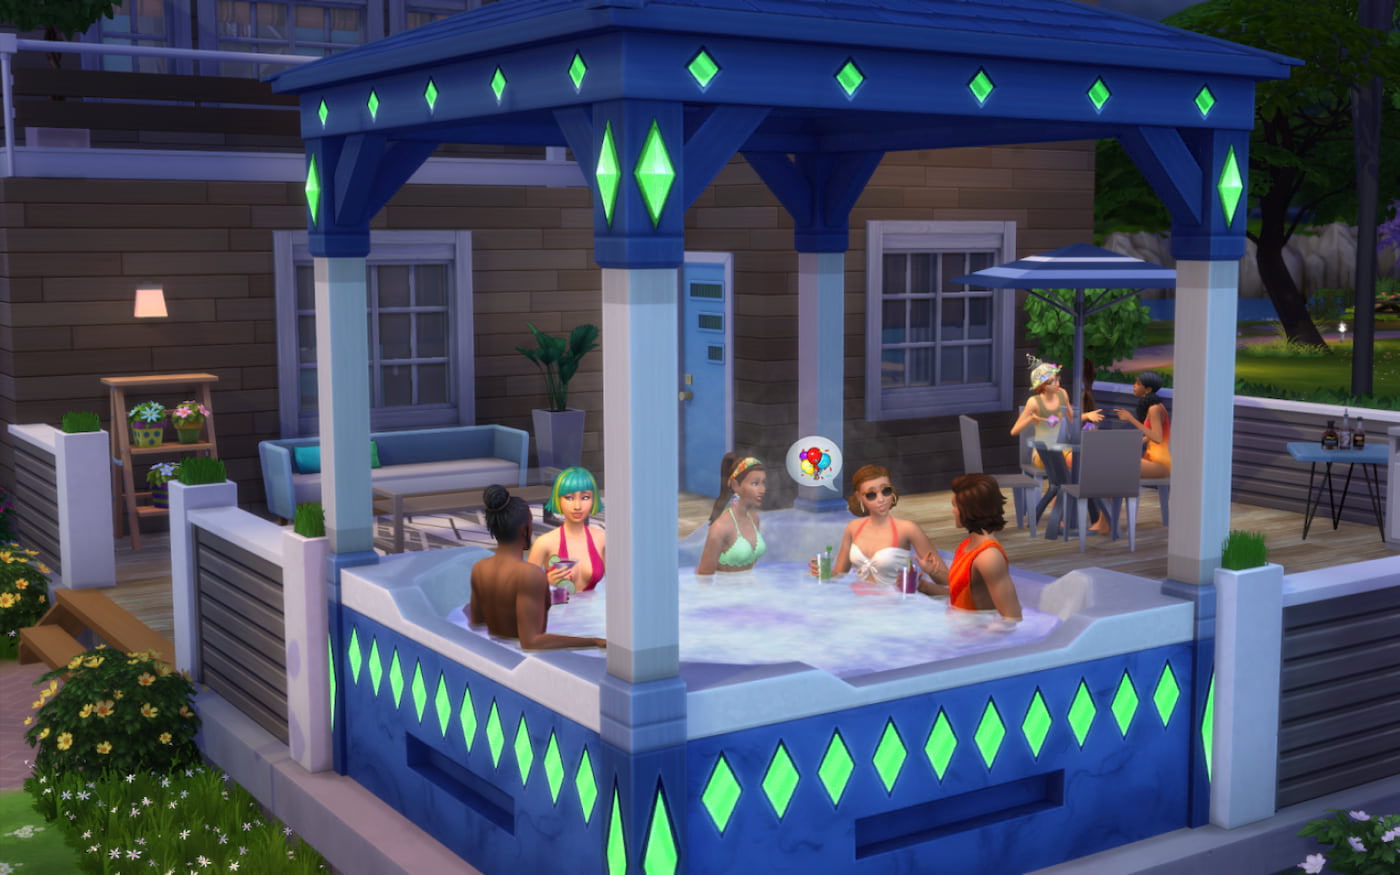 The Sims turns 20 and returns from the hot tub